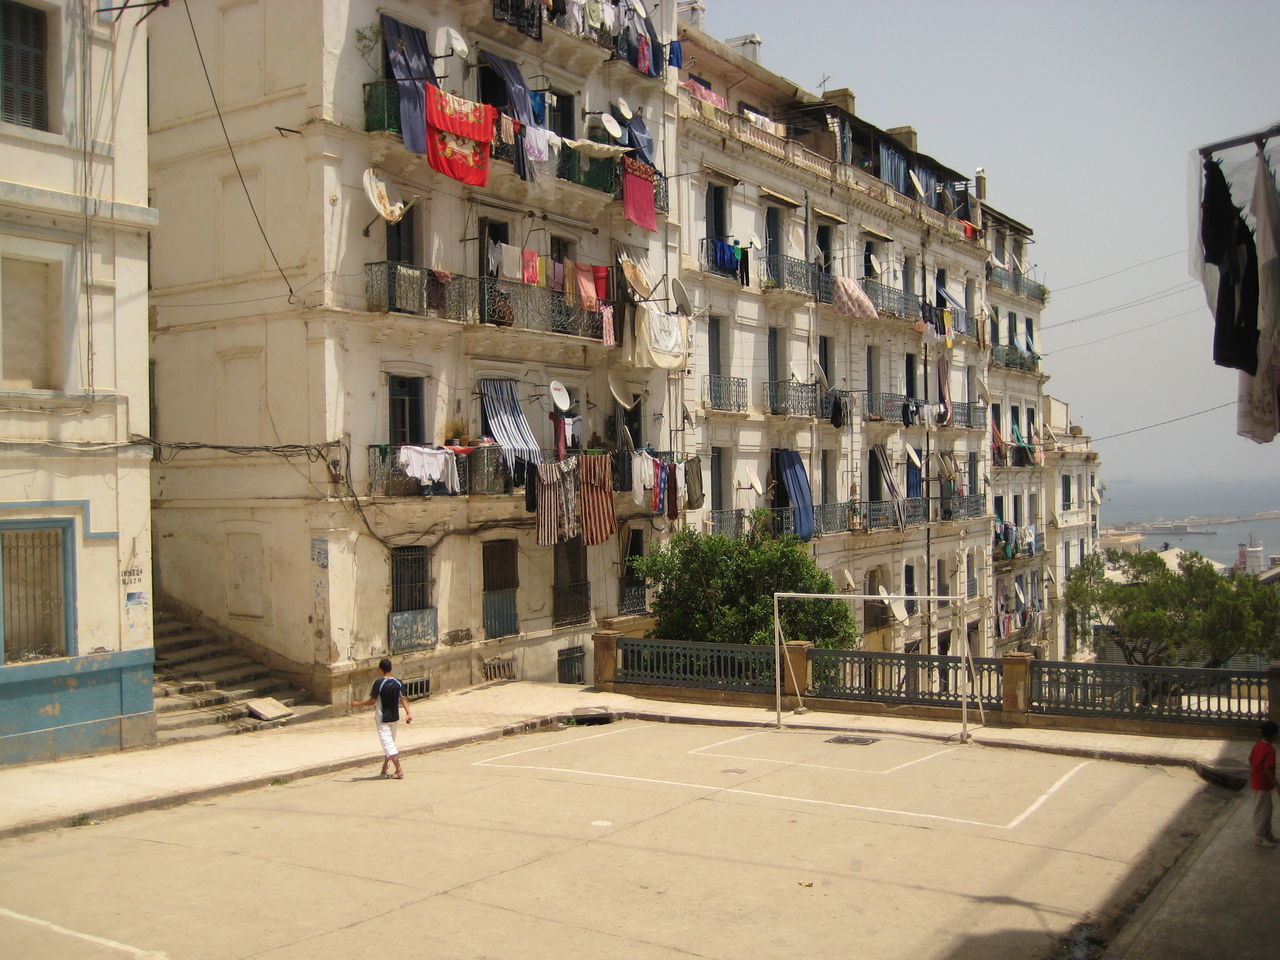 CLOTHES HANGING AGAINST SKY